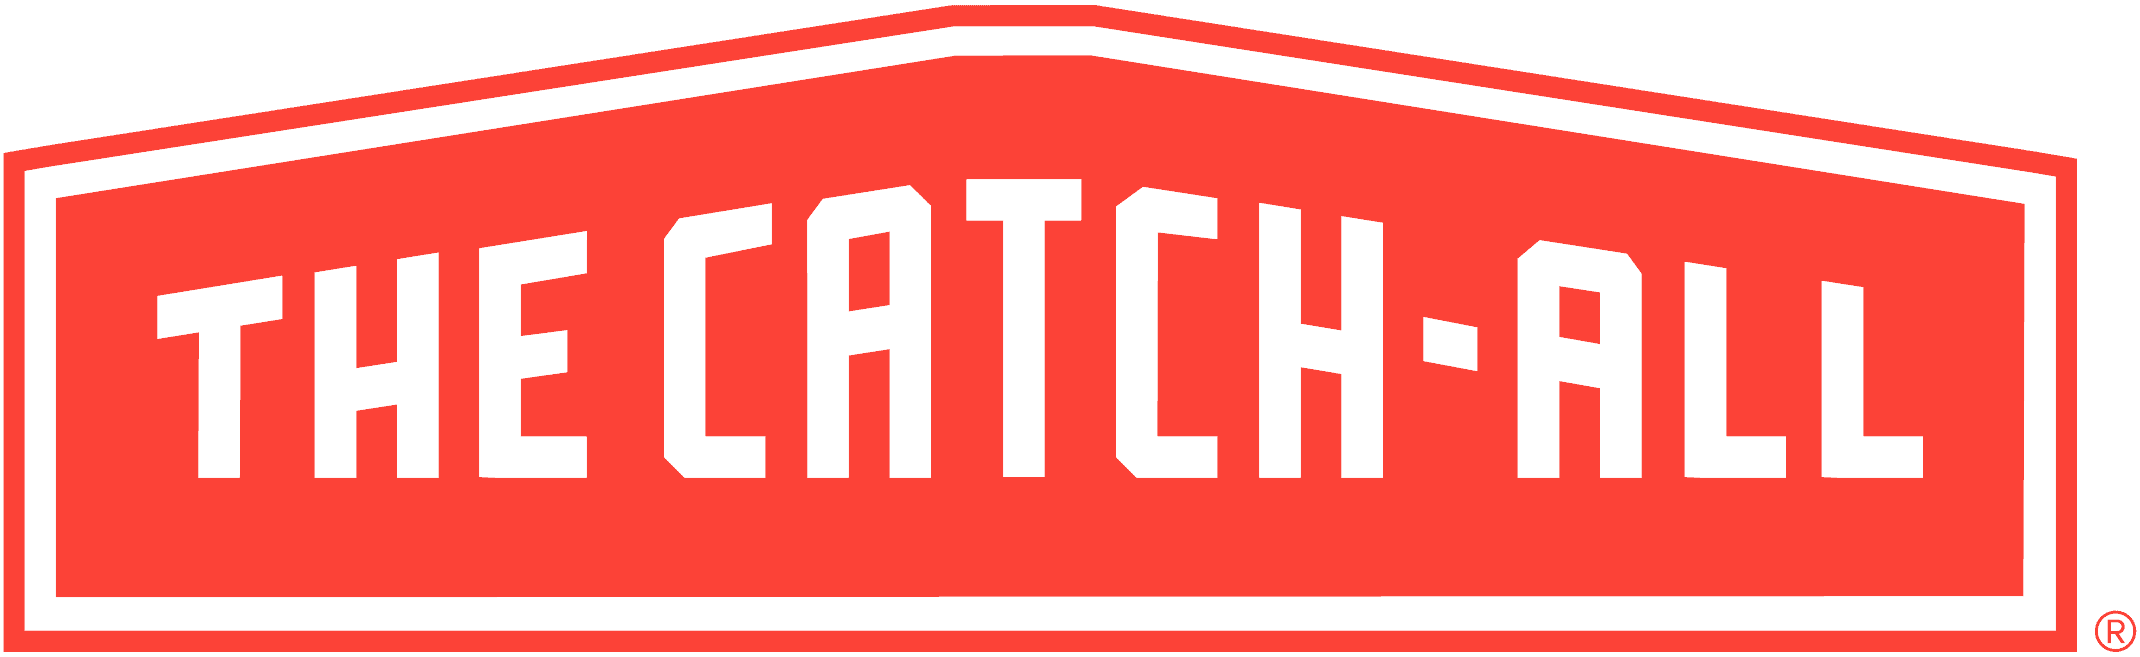 The Catch-All